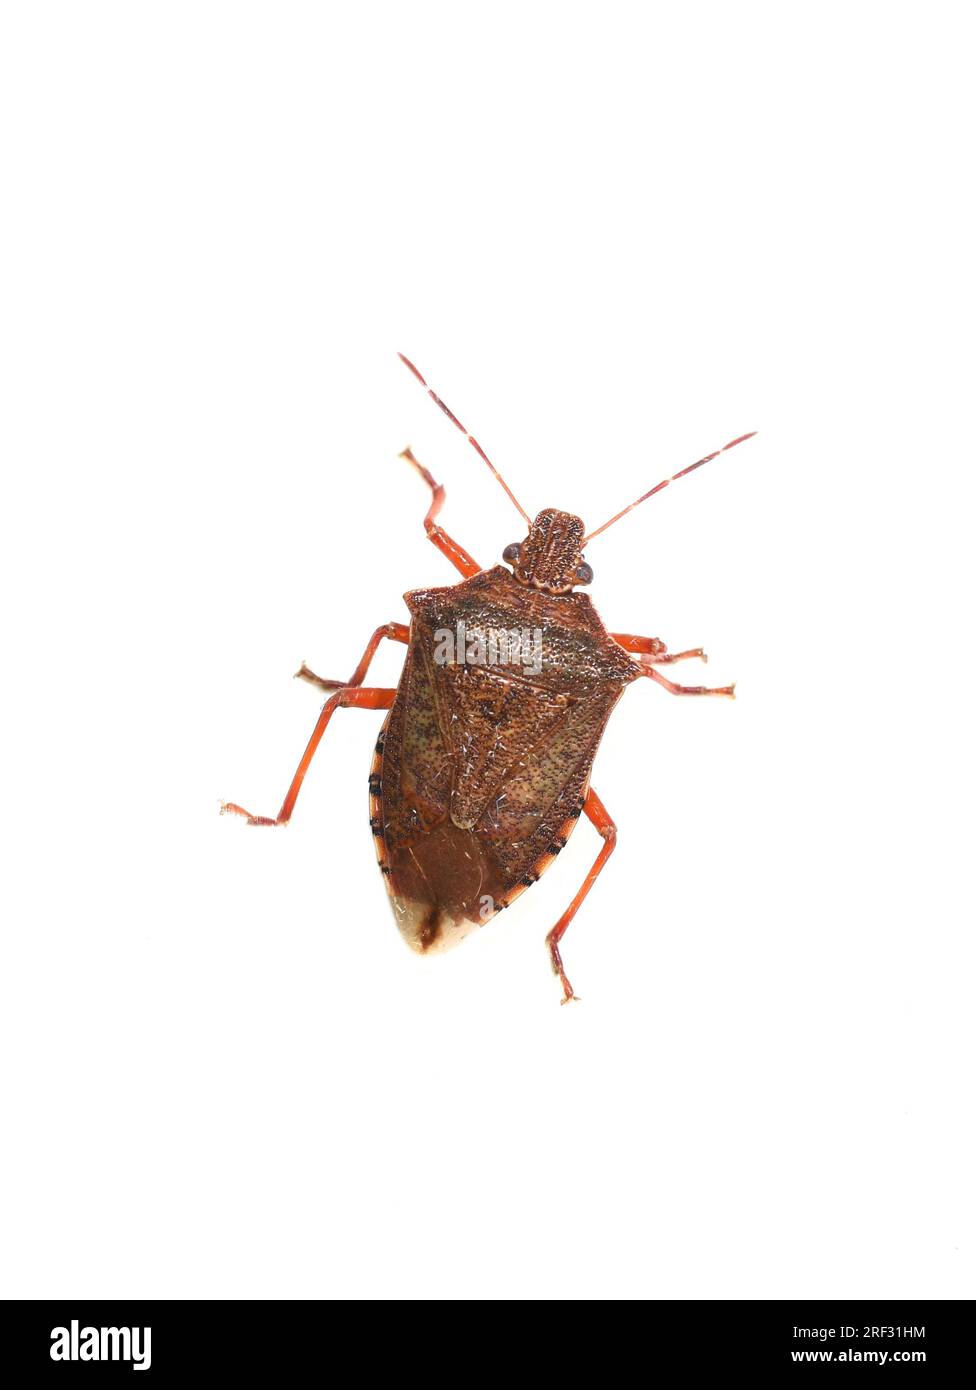 Predatory spined soldier bug Podisus maculiventris on white background Stock Photo